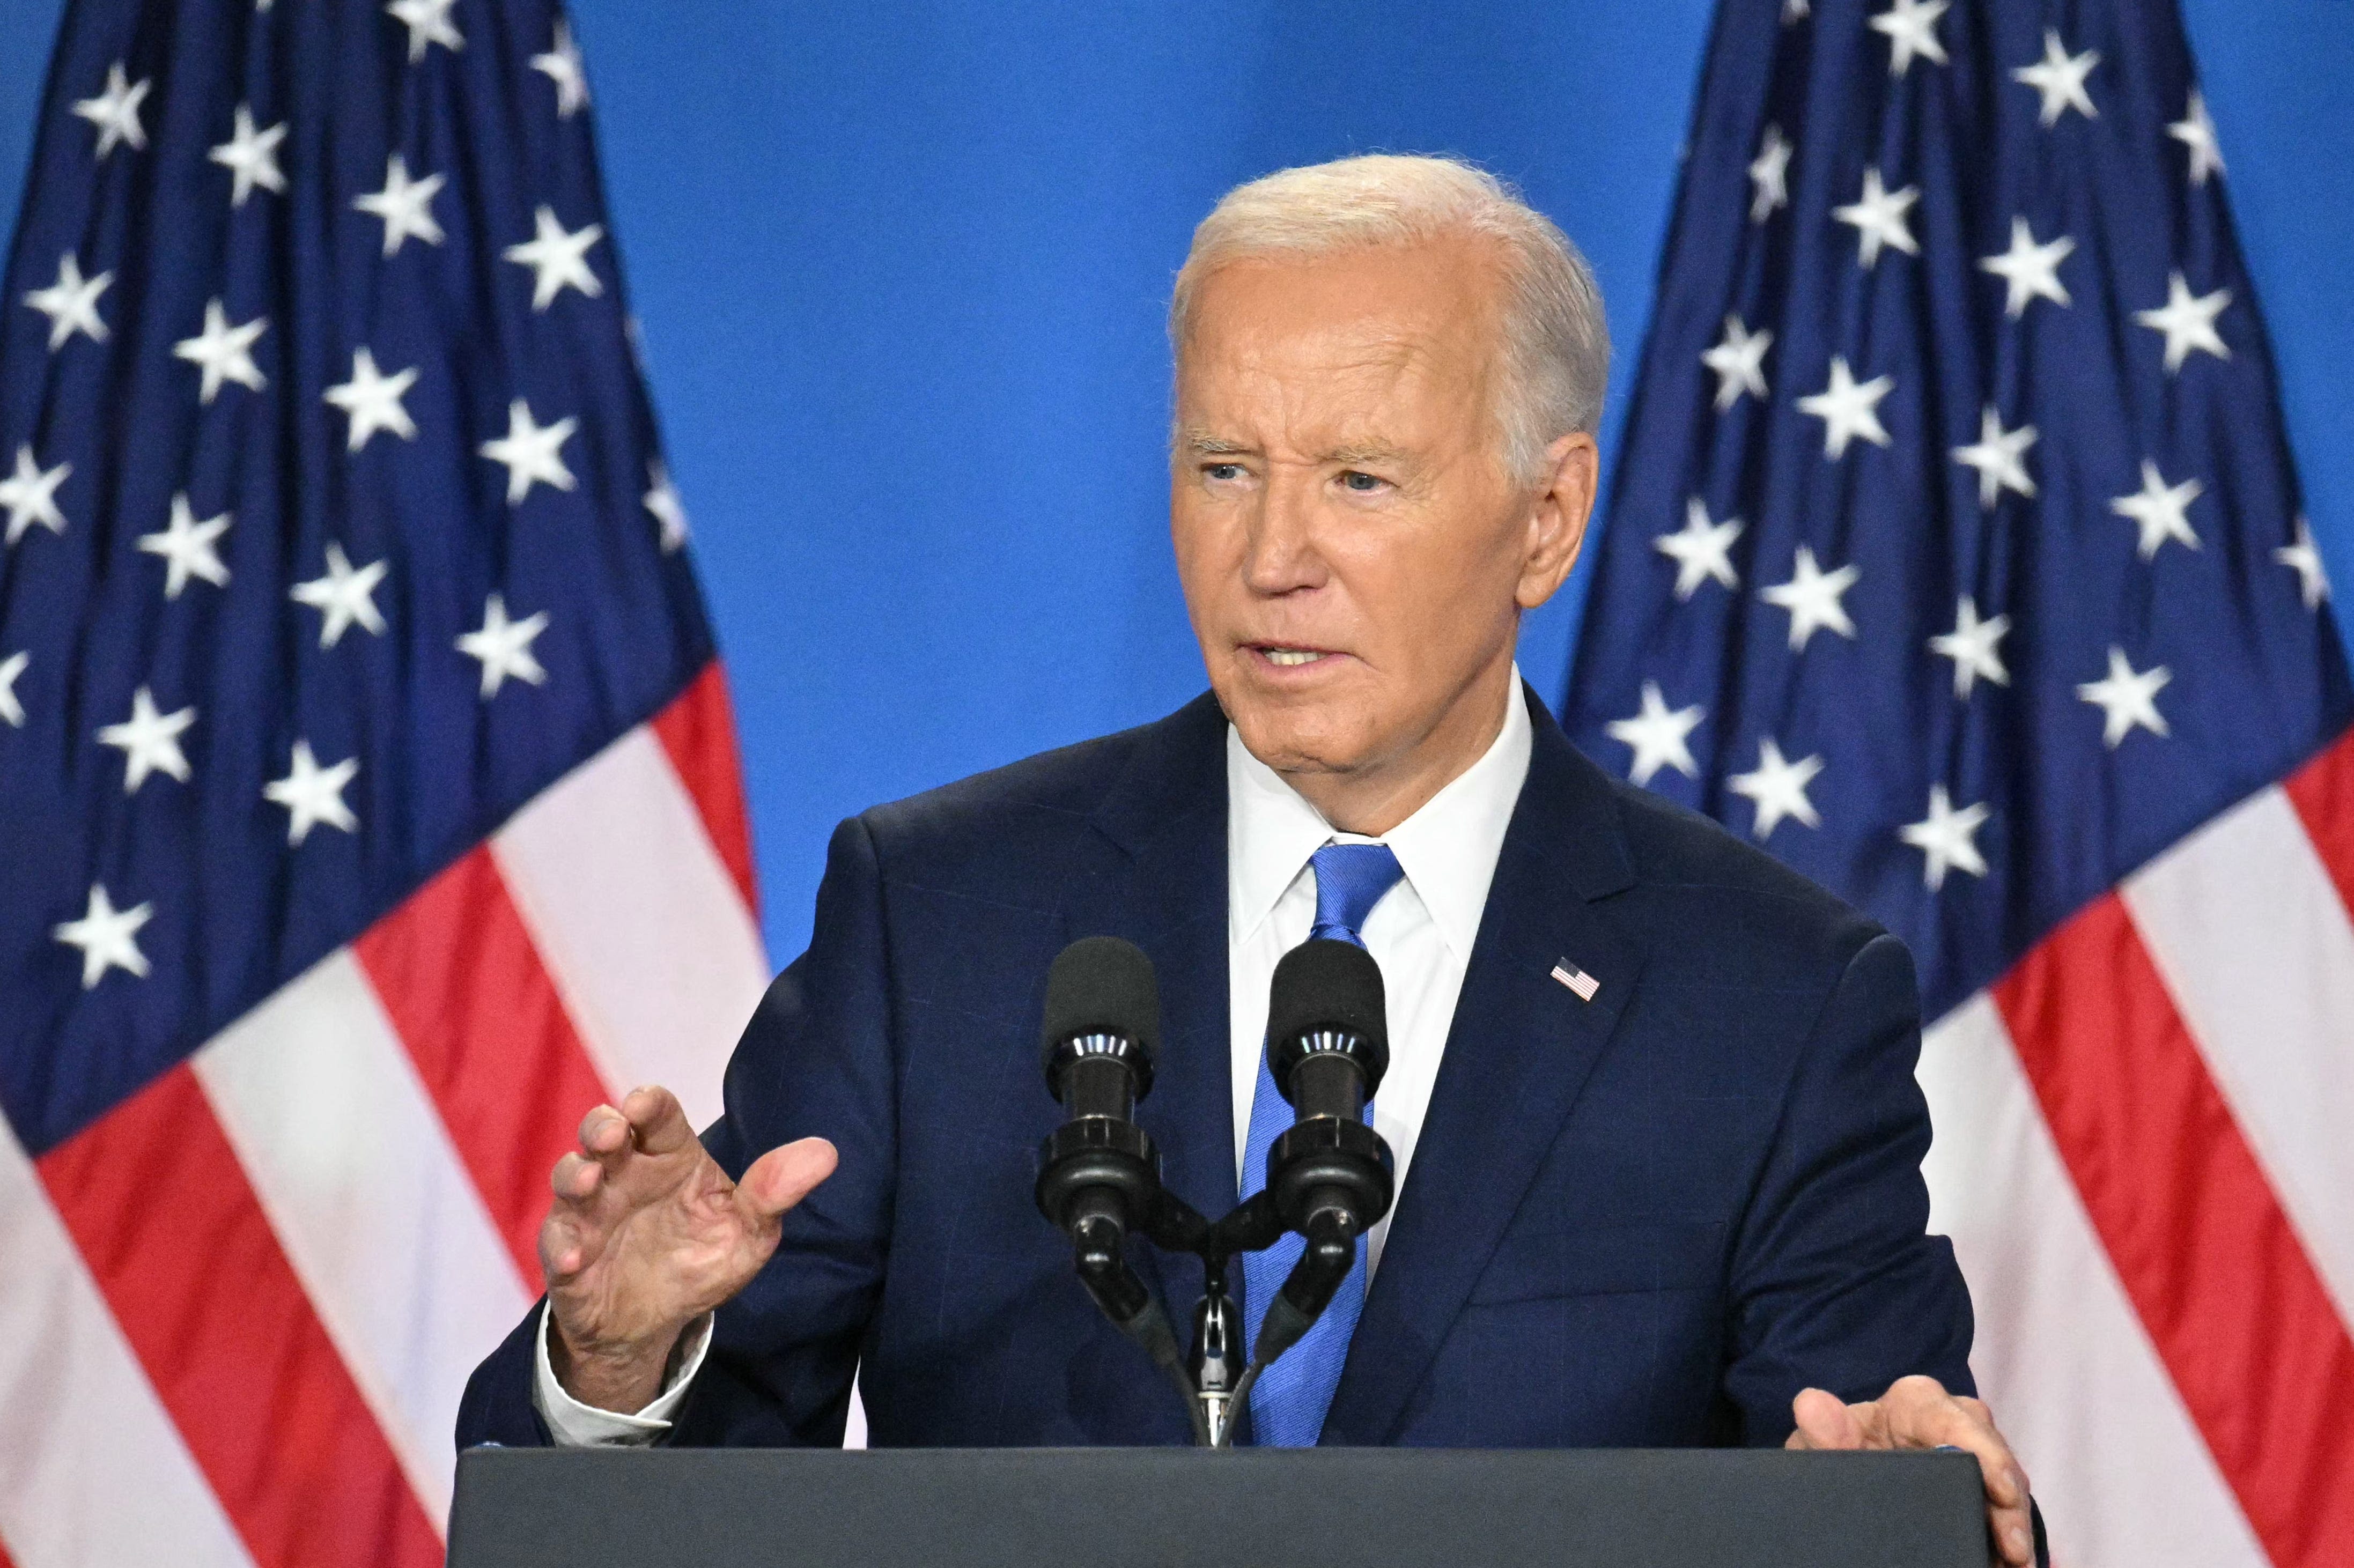 Was Joe Biden using a teleprompter? How Thursday's press conference was formatted